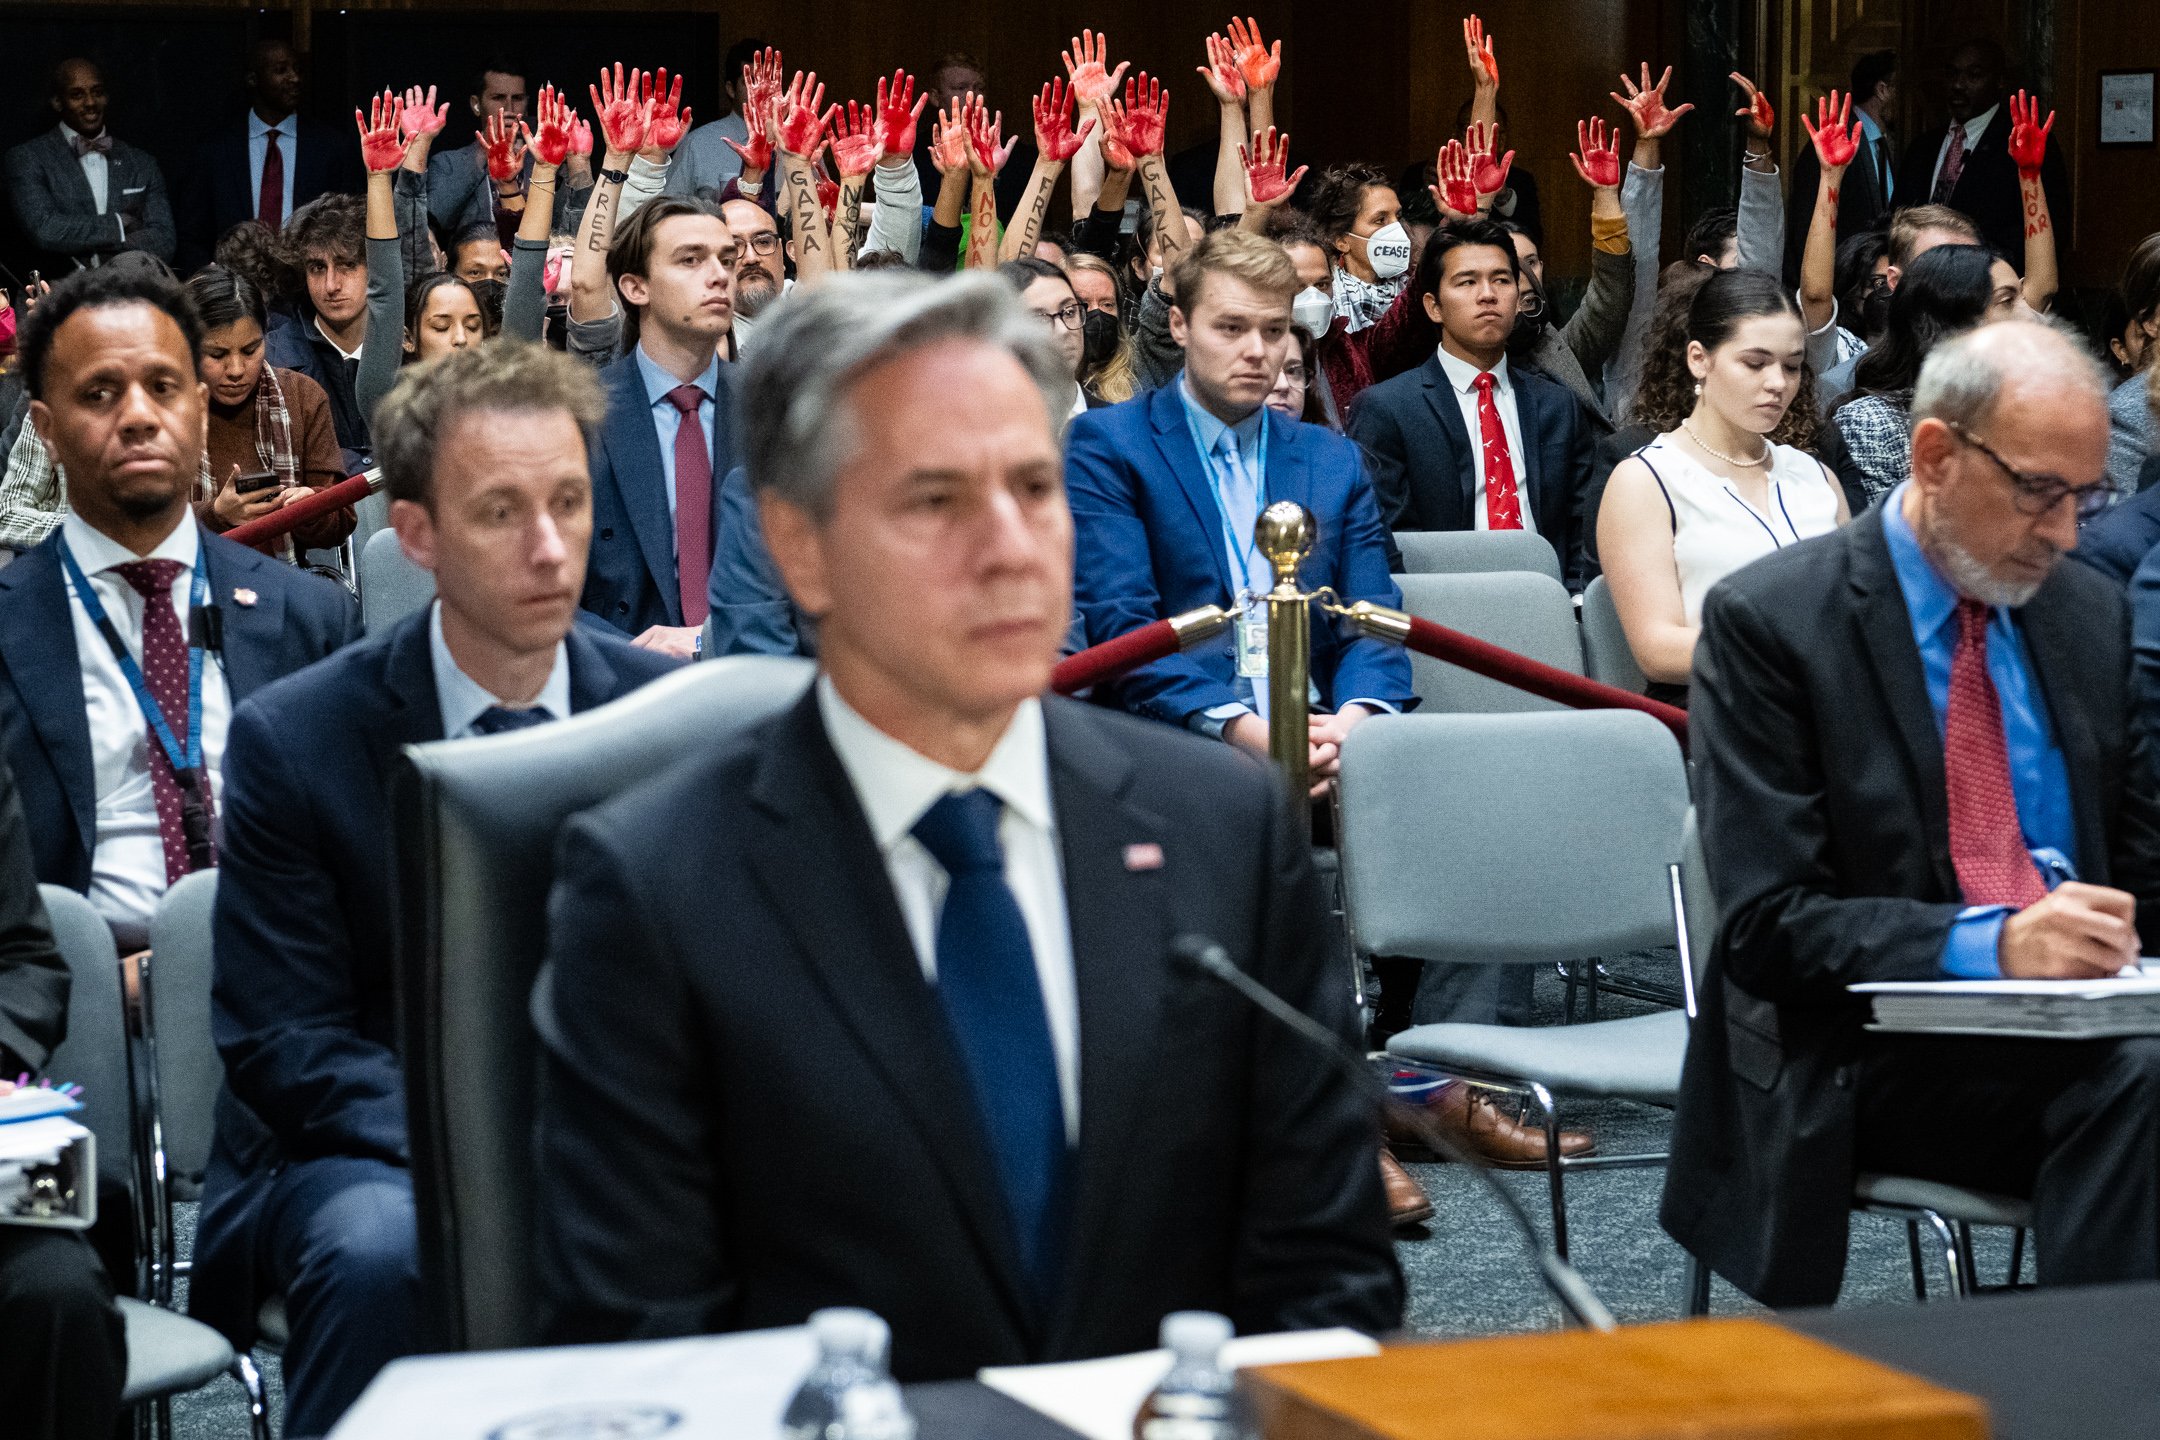  Protesters calling for a ceasefire in Gaza raise their hands painted to look like blood, in the audience behind Secretary of State Antony Blinken, during a Senate Appropriations Committee hearing to review President Biden’s request for emergency fun